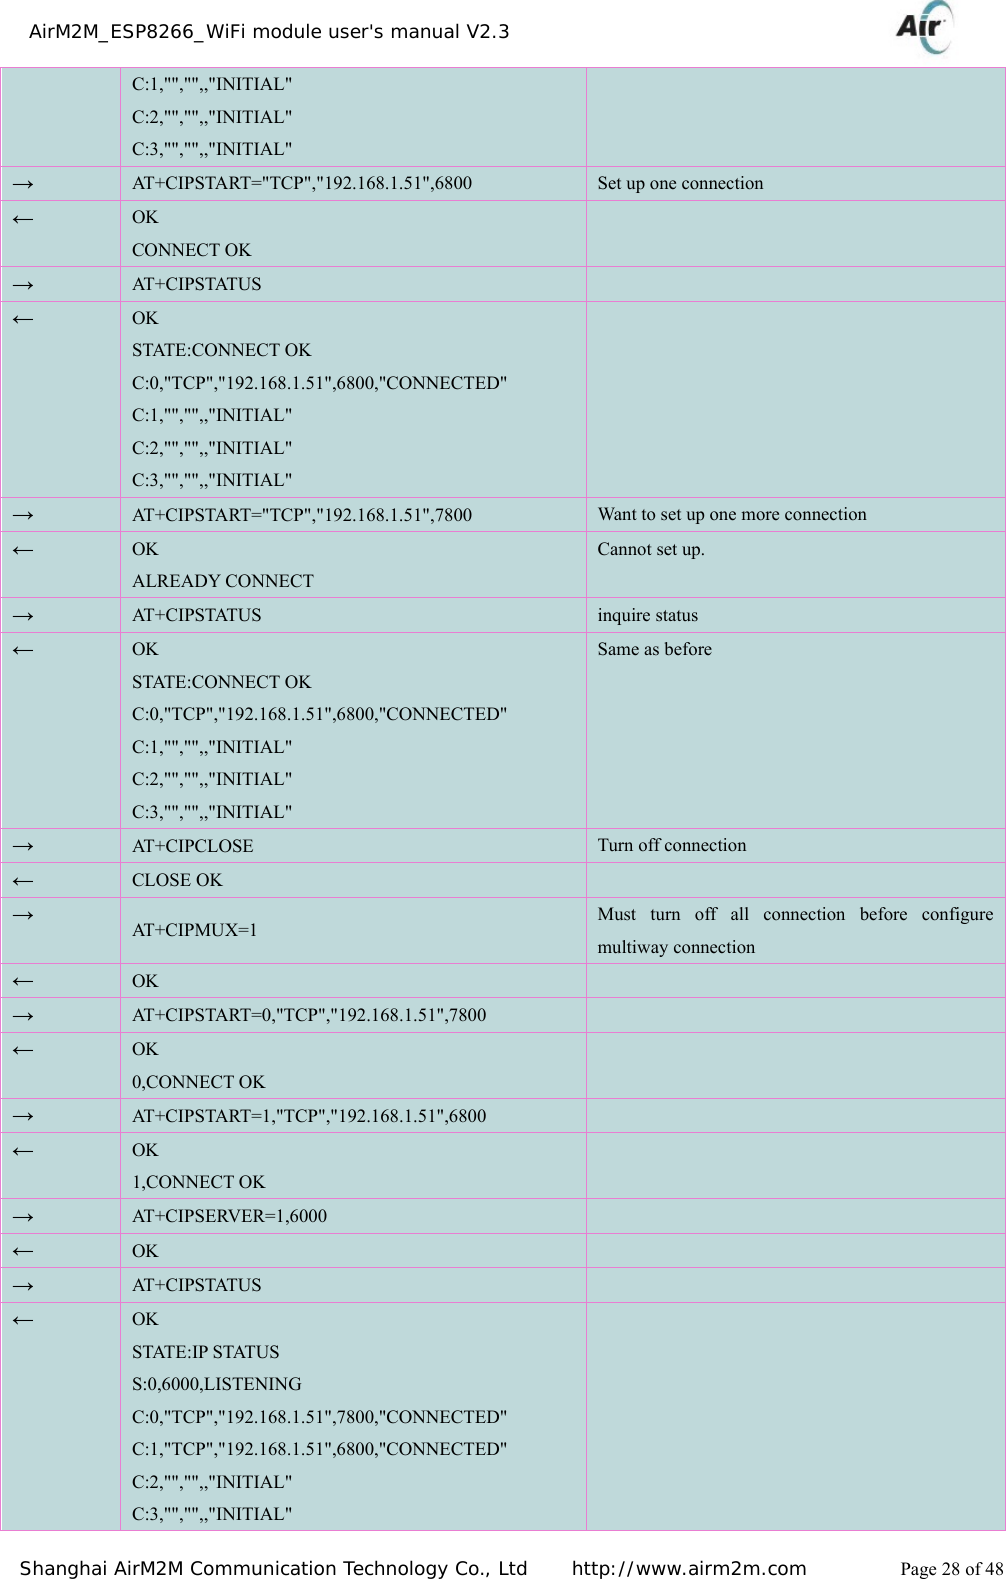    AirM2M_ESP8266_WiFi module user&apos;s manual V2.3   Shanghai AirM2M Communication Technology Co., Ltd     http://www.airm2m.com          Page 28 of 48 C:1,&quot;&quot;,&quot;&quot;,,&quot;INITIAL&quot; C:2,&quot;&quot;,&quot;&quot;,,&quot;INITIAL&quot; C:3,&quot;&quot;,&quot;&quot;,,&quot;INITIAL&quot; → AT+CIPSTART=&quot;TCP&quot;,&quot;192.168.1.51&quot;,6800  Set up one connection ← OK CONNECT OK  → AT +C IPSTAT US   ← OK STATE:CONNECT OK C:0,&quot;TCP&quot;,&quot;192.168.1.51&quot;,6800,&quot;CONNECTED&quot; C:1,&quot;&quot;,&quot;&quot;,,&quot;INITIAL&quot; C:2,&quot;&quot;,&quot;&quot;,,&quot;INITIAL&quot; C:3,&quot;&quot;,&quot;&quot;,,&quot;INITIAL&quot;  → AT+CIPSTART=&quot;TCP&quot;,&quot;192.168.1.51&quot;,7800  Want to set up one more connection ← OK ALREADY CONNECT Cannot set up. → AT +C IPSTAT US  inquire status ← OK STATE:CONNECT OK C:0,&quot;TCP&quot;,&quot;192.168.1.51&quot;,6800,&quot;CONNECTED&quot; C:1,&quot;&quot;,&quot;&quot;,,&quot;INITIAL&quot; C:2,&quot;&quot;,&quot;&quot;,,&quot;INITIAL&quot; C:3,&quot;&quot;,&quot;&quot;,,&quot;INITIAL&quot; Same as before → AT +C IPCL OSE   Turn off connection ← CLOSE OK   → AT+CIPMUX=1  Must turn off all connection before configure multiway connection ← OK   → AT+CIPSTART=0,&quot;TCP&quot;,&quot;192.168.1.51&quot;,7800   ← OK 0,CONNECT OK  → AT+CIPSTART=1,&quot;TCP&quot;,&quot;192.168.1.51&quot;,6800   ← OK 1,CONNECT OK  → AT+CIPSERVER=1,6000   ← OK   → AT +C IPSTAT US   ← OK STATE:IP STATUS S:0,6000,LISTENING C:0,&quot;TCP&quot;,&quot;192.168.1.51&quot;,7800,&quot;CONNECTED&quot; C:1,&quot;TCP&quot;,&quot;192.168.1.51&quot;,6800,&quot;CONNECTED&quot; C:2,&quot;&quot;,&quot;&quot;,,&quot;INITIAL&quot; C:3,&quot;&quot;,&quot;&quot;,,&quot;INITIAL&quot;  